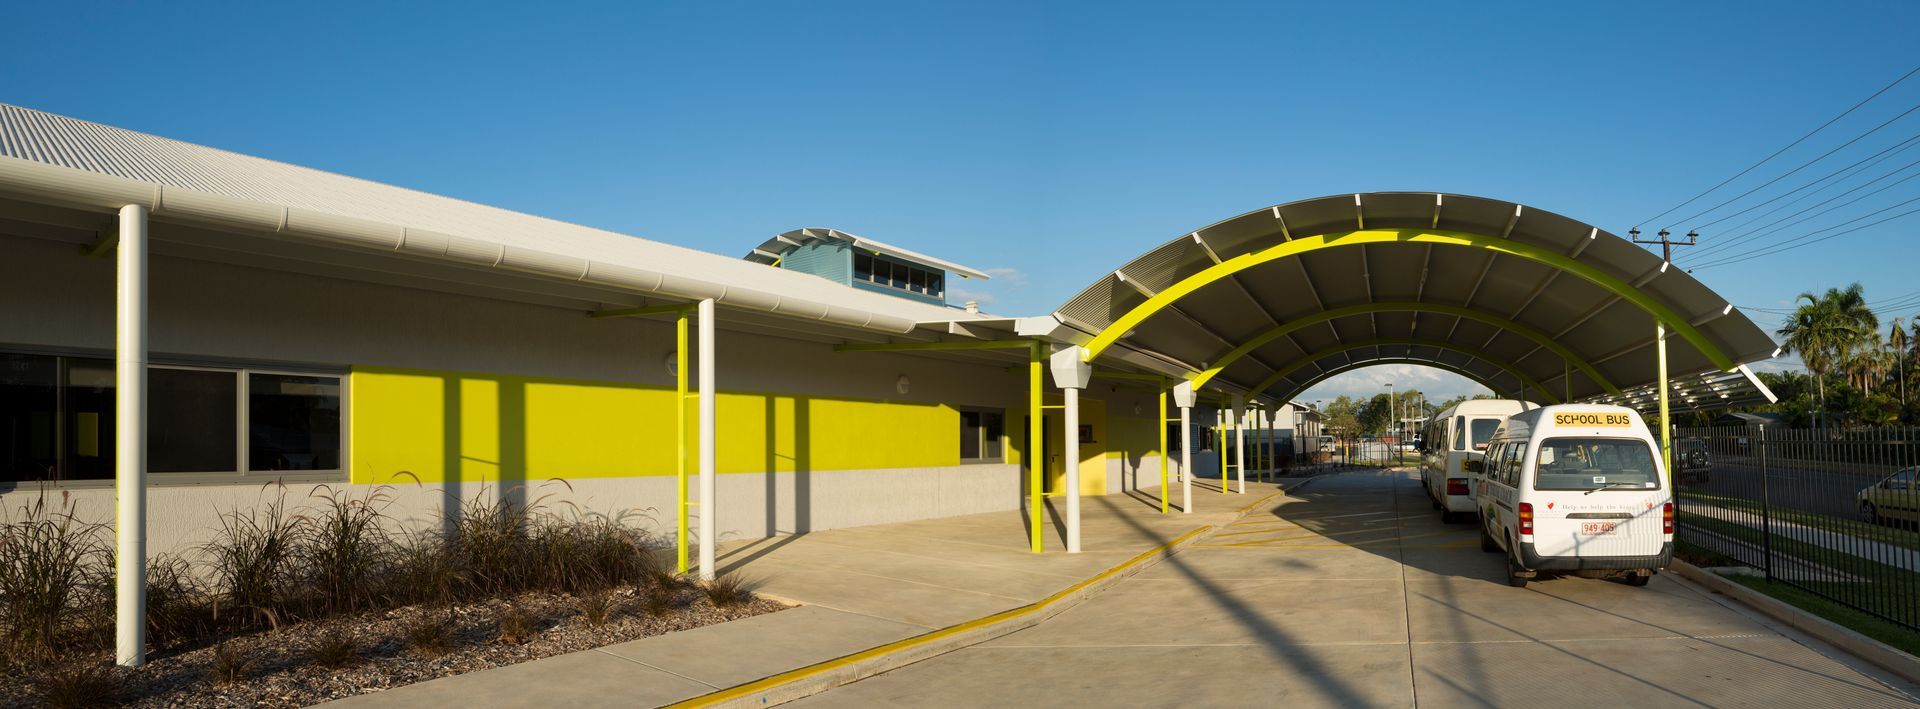 A yellow and white building with a canopy over it.